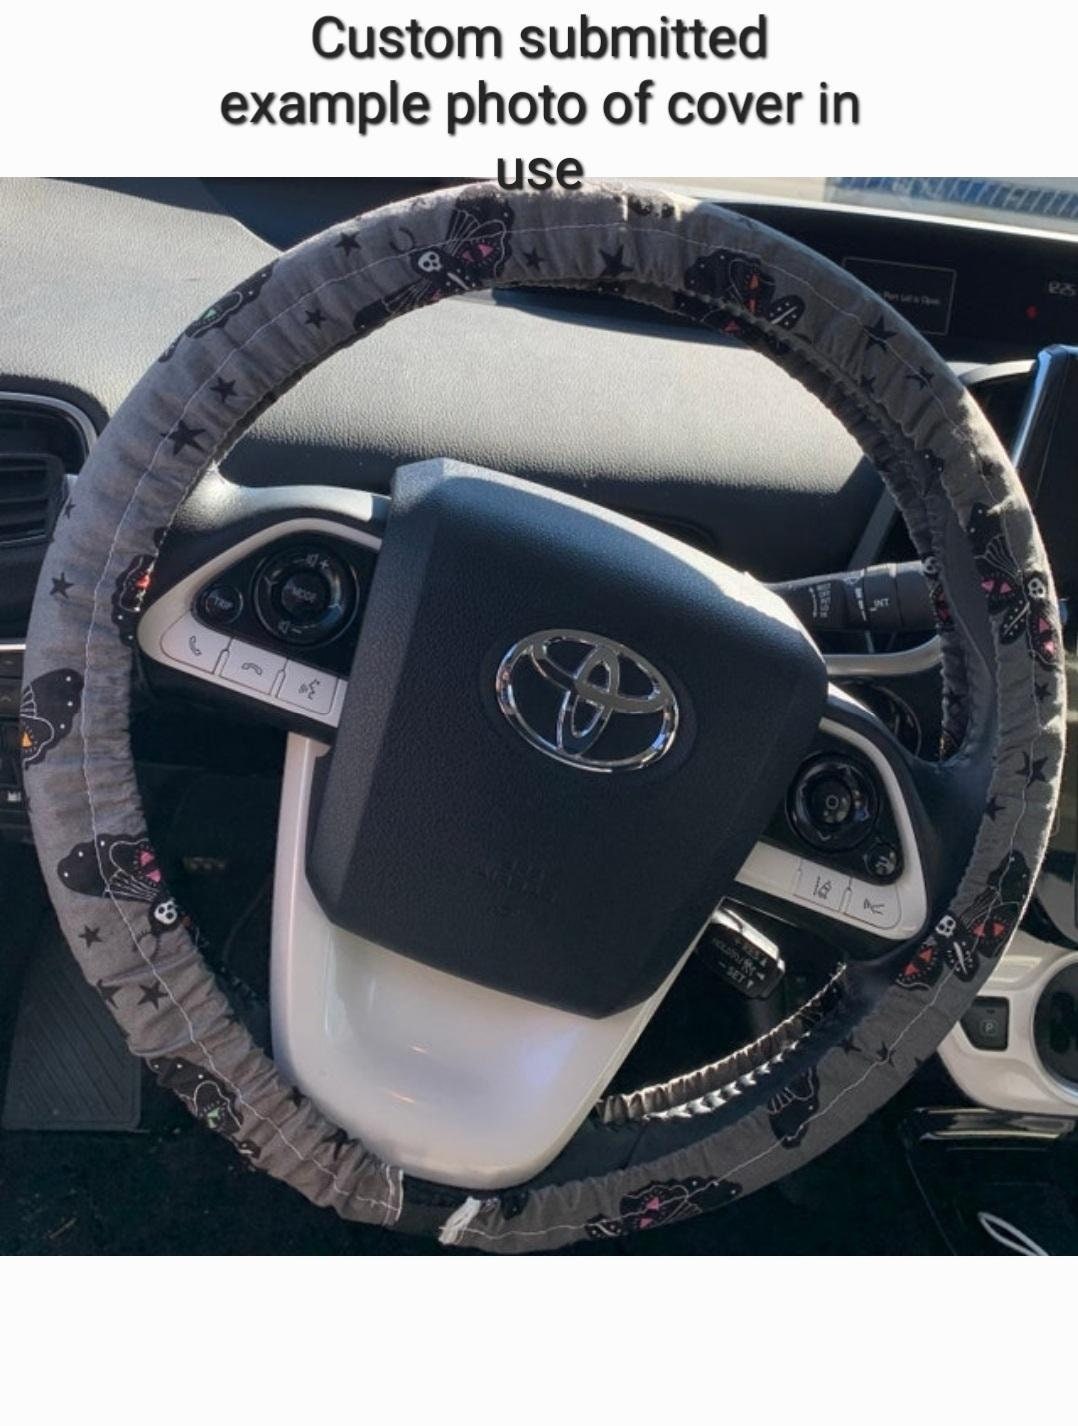 Mini Black Floral Steering Wheel Cover, 100% Cotton, Washable, Custom Car Accessories - Harlow's Store and Garden Gifts